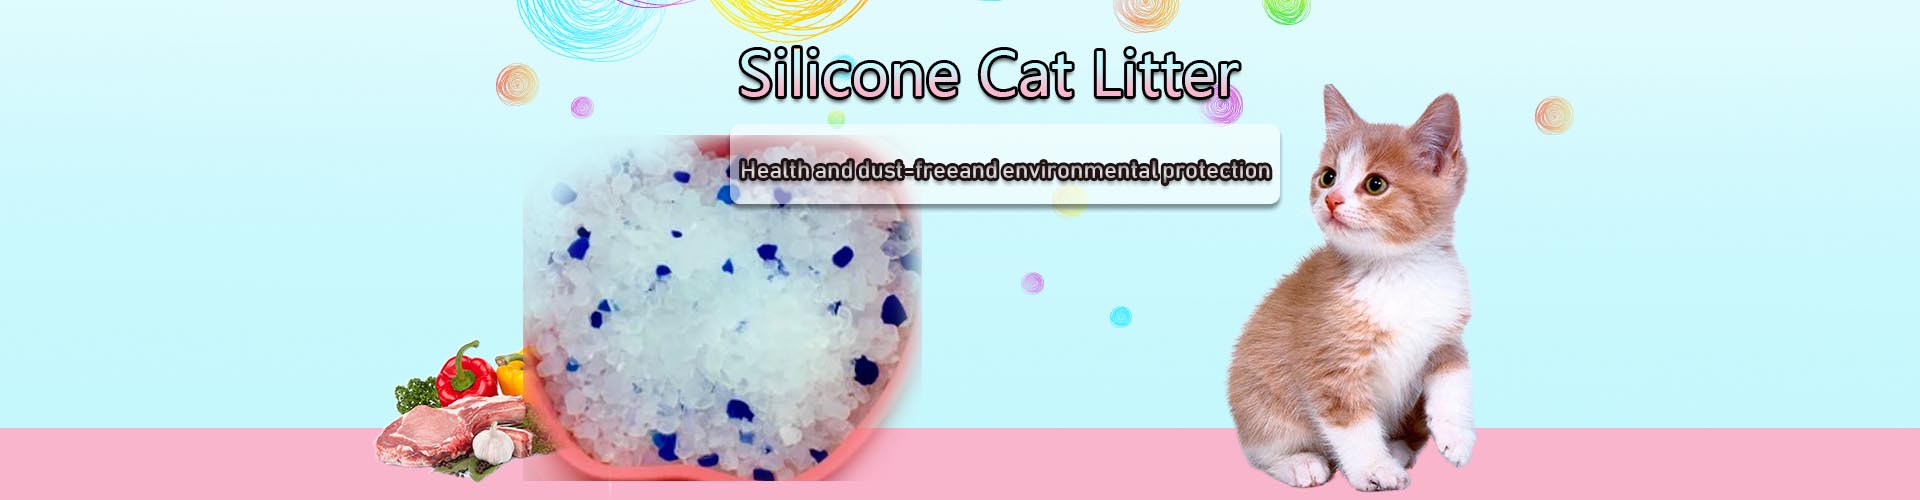 silicone-cat-litter